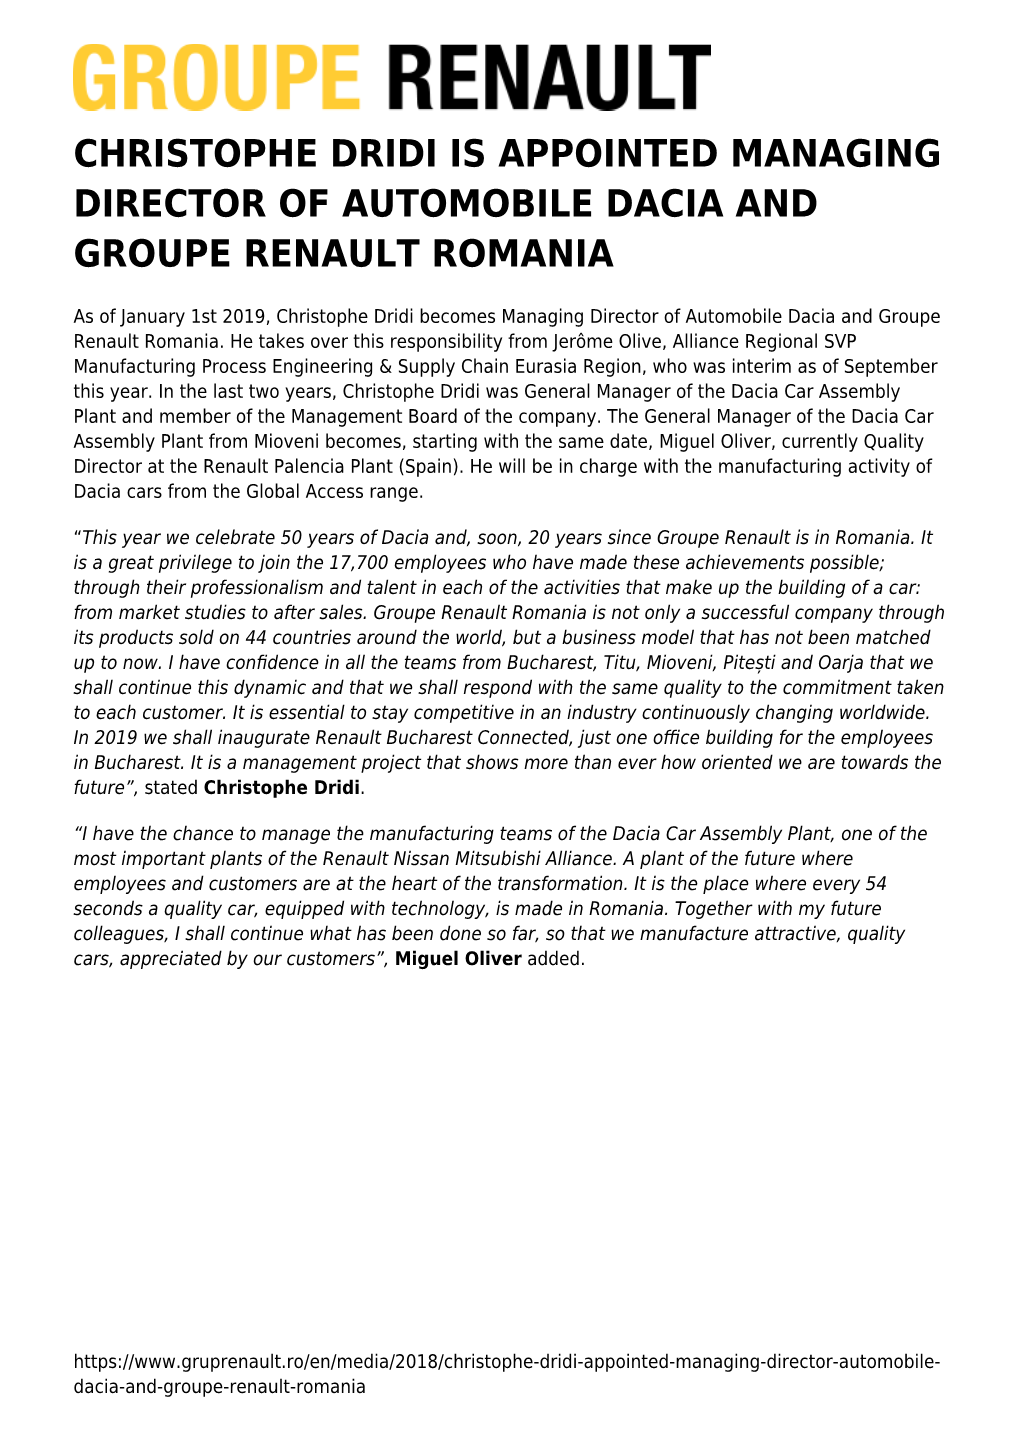 Christophe Dridi Is Appointed Managing Director of Automobile Dacia and Groupe Renault Romania